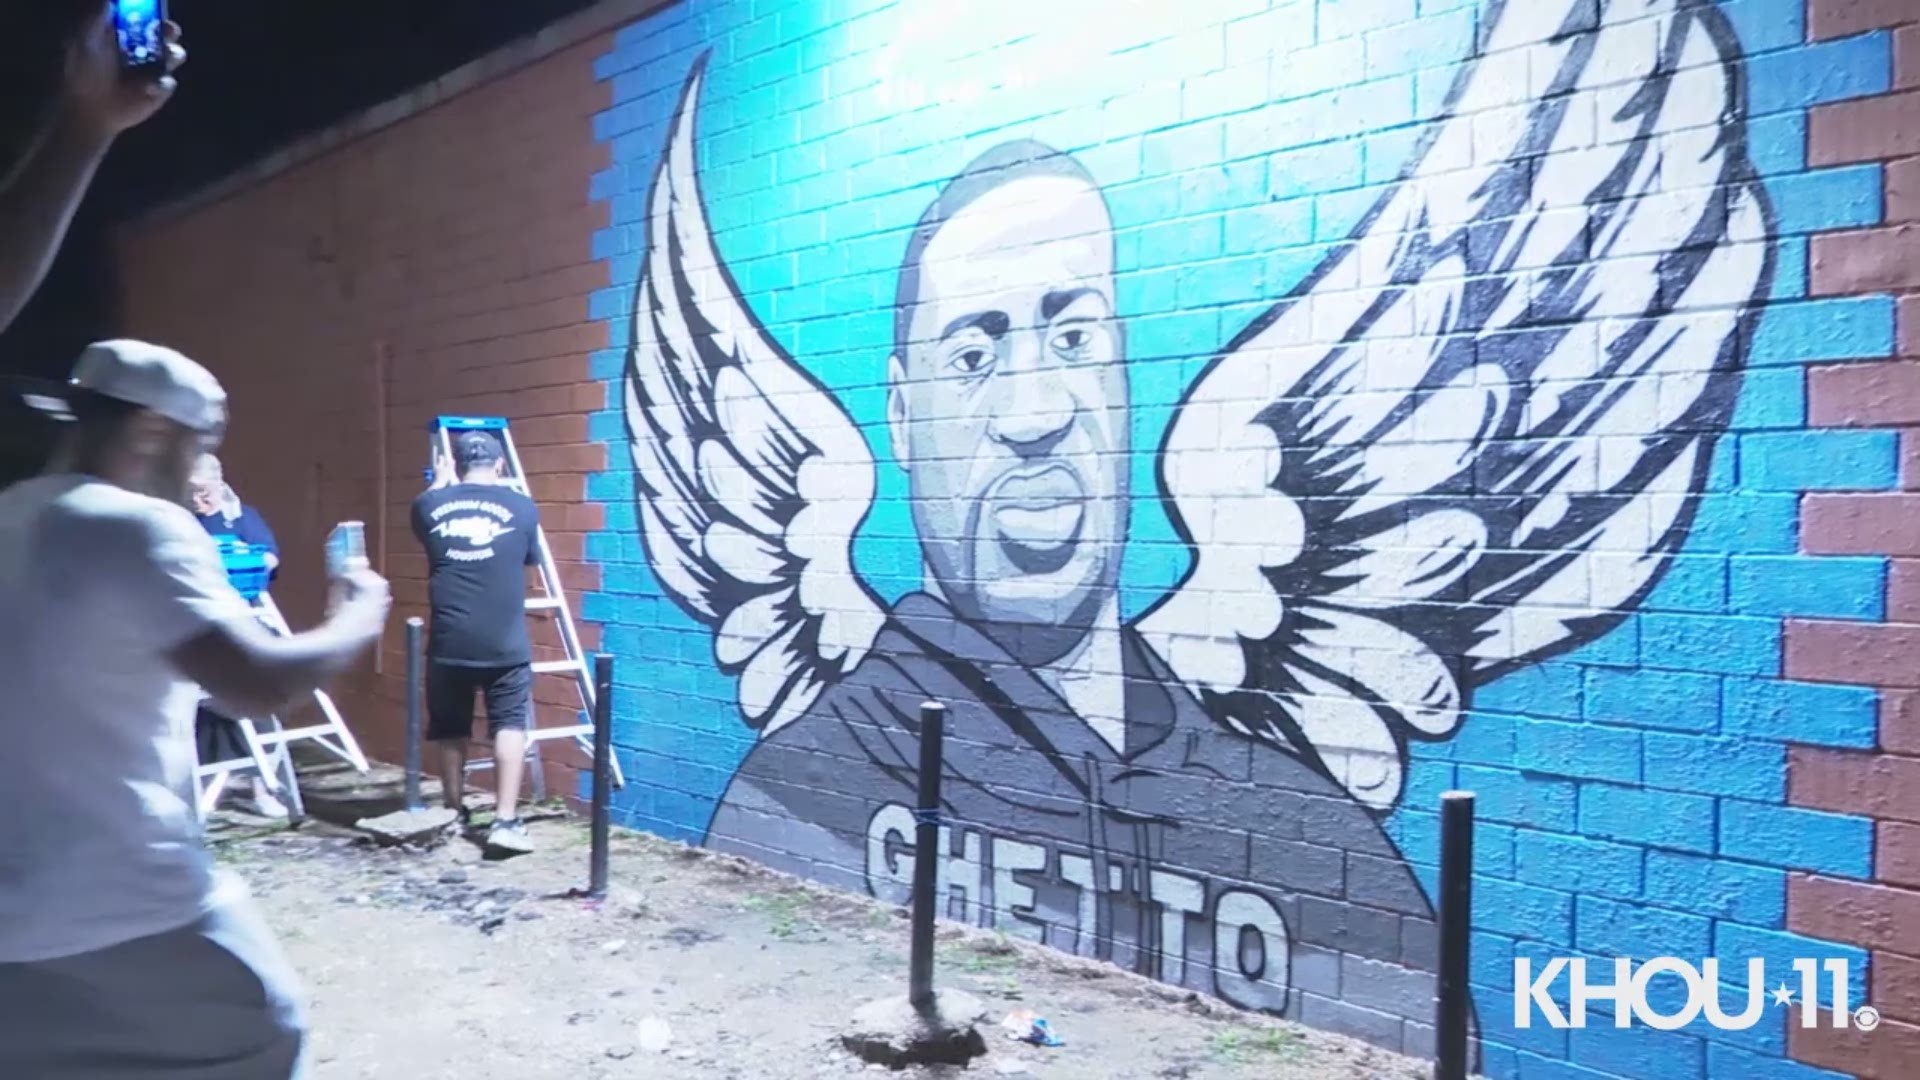 George Floyd is being remembered with a mural in the Third Ward a week after his death in Minneapolis.